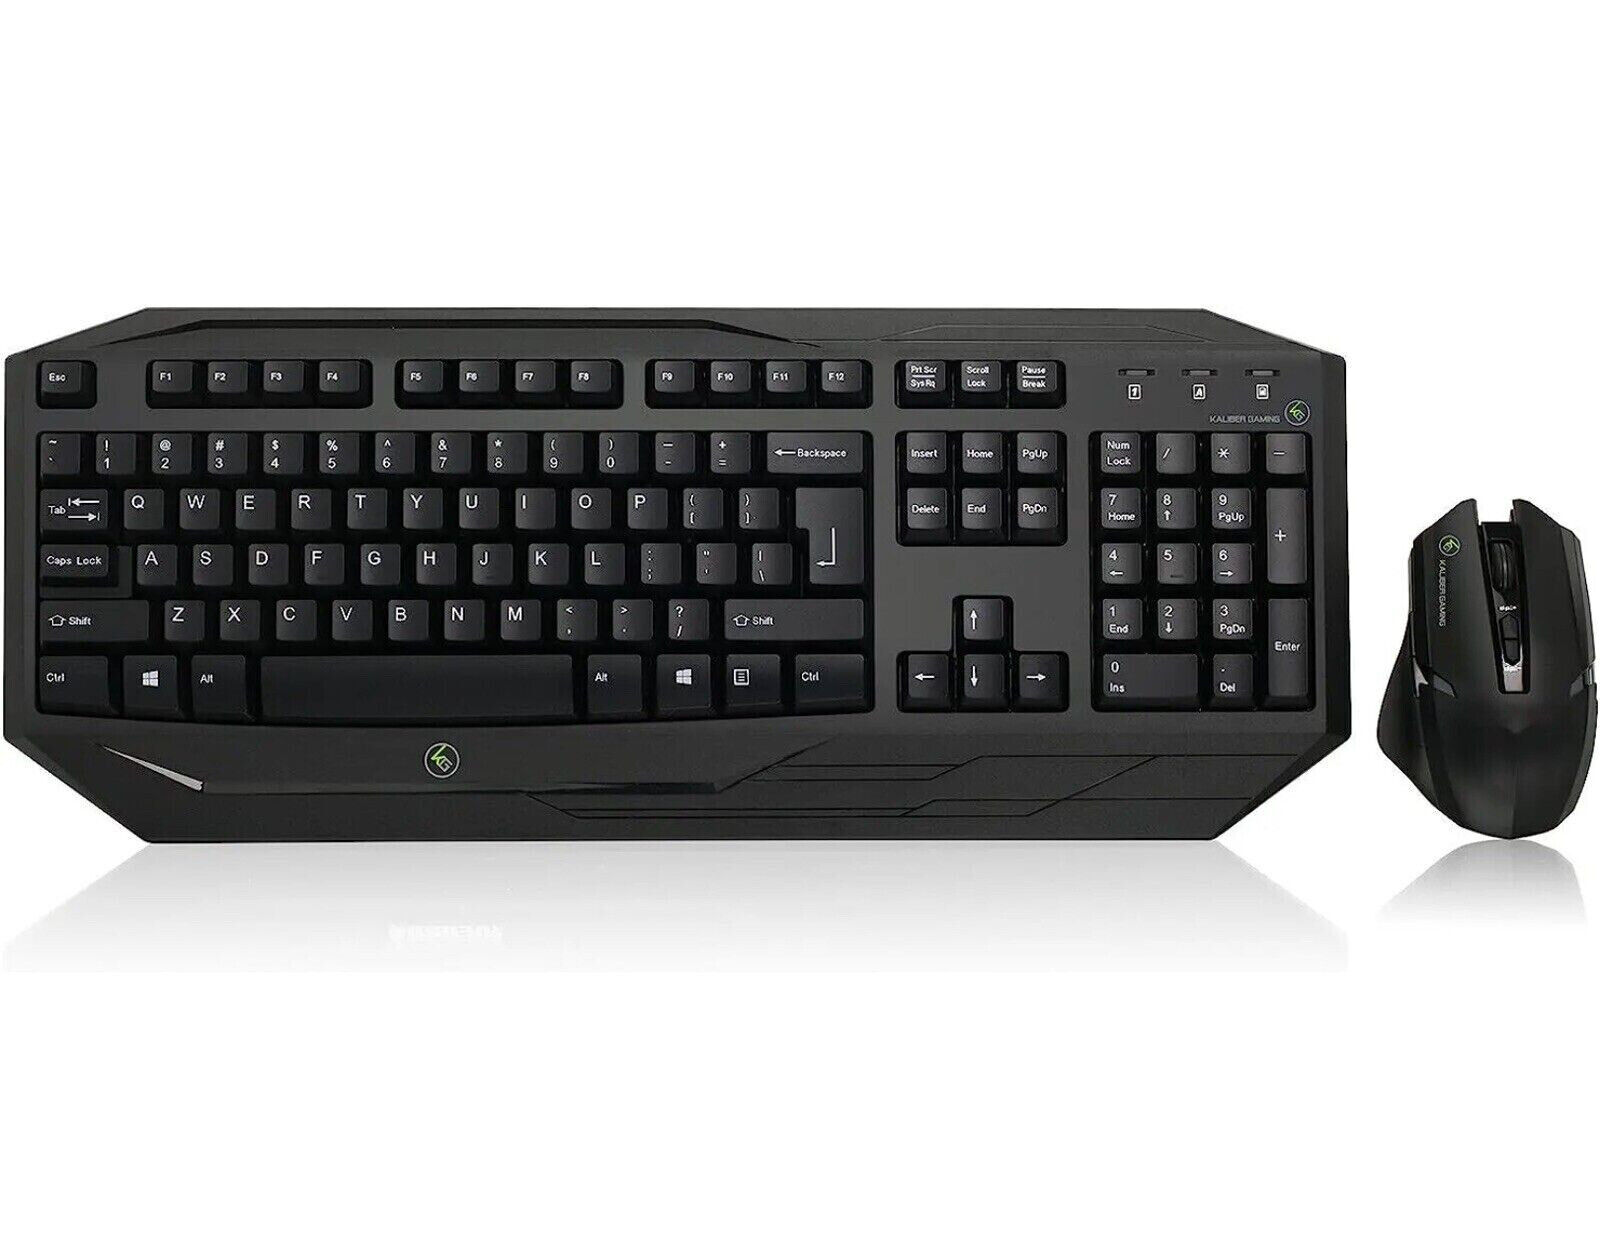 IOGEAR Kaliber Gaming Wireless Gaming Keyboard and Mouse Combo, GKM602R